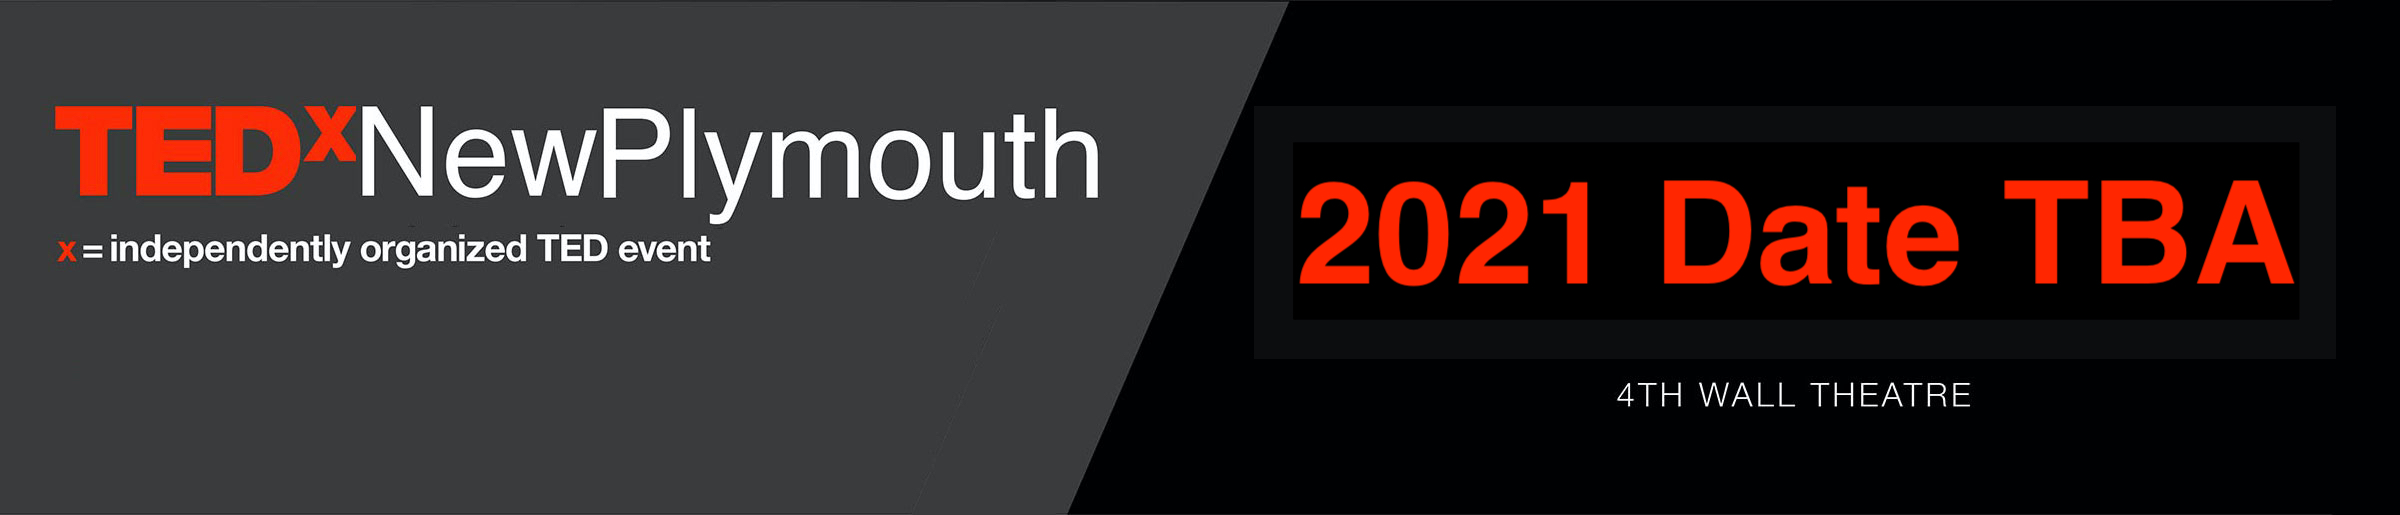 TEDxNewPlymouth - Sometime in 2021! 4th Wall Theatre, Date TBA